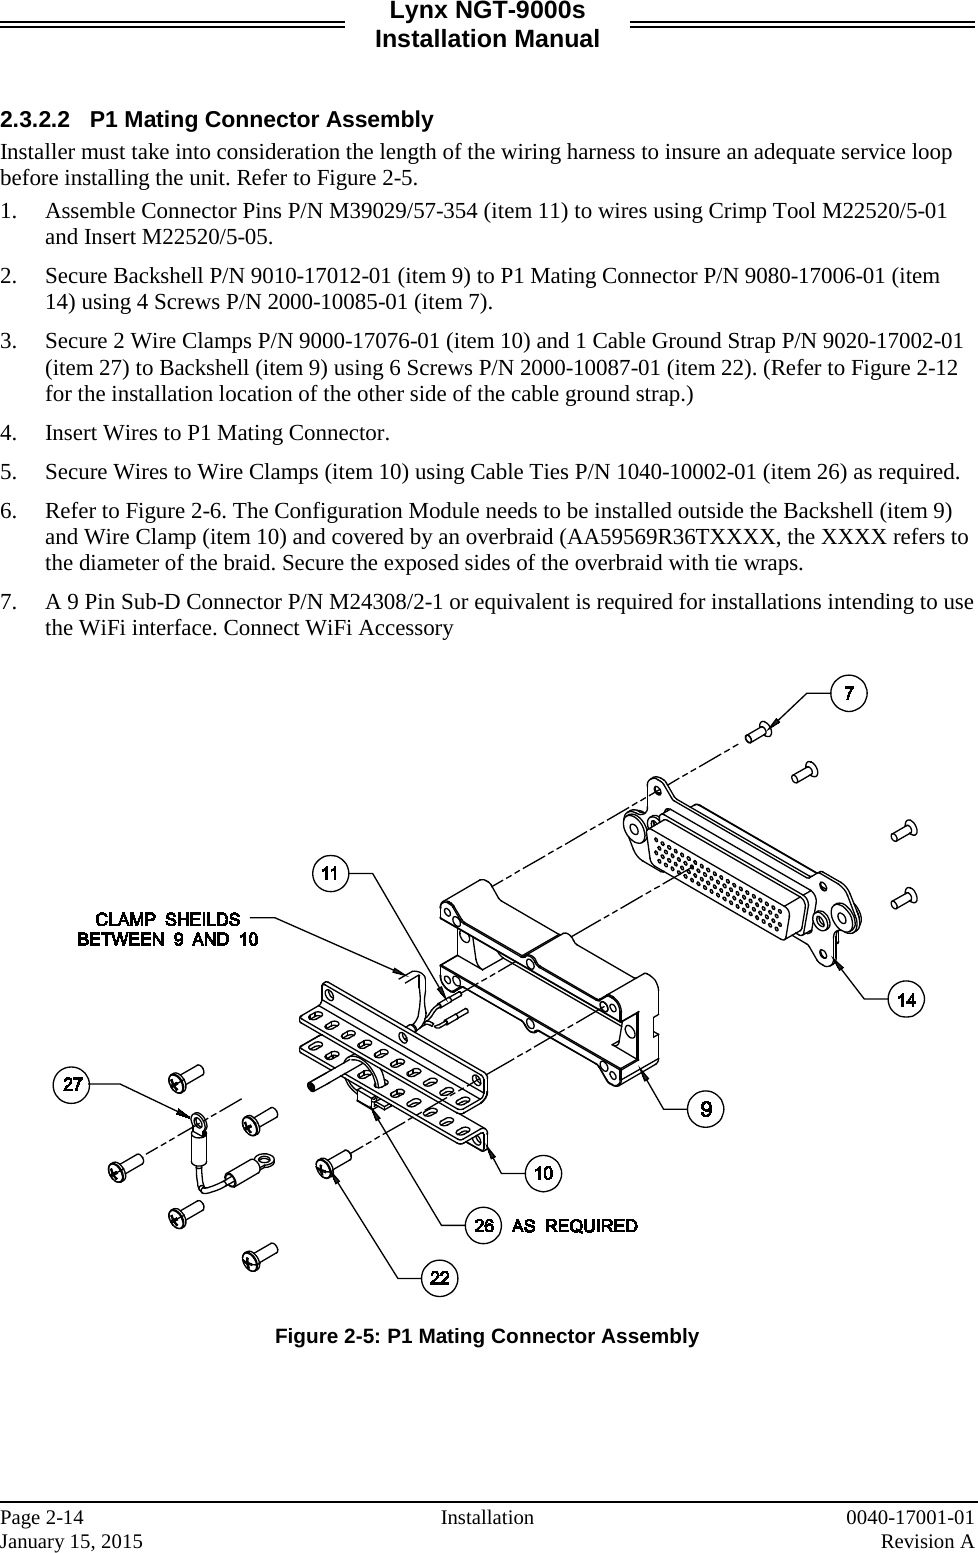 Lynx NGT-9000s Installation Manual   2.3.2.2 P1 Mating Connector Assembly Installer must take into consideration the length of the wiring harness to insure an adequate service loop before installing the unit. Refer to Figure 2-5. 1. Assemble Connector Pins P/N M39029/57-354 (item 11) to wires using Crimp Tool M22520/5-01 and Insert M22520/5-05. 2. Secure Backshell P/N 9010-17012-01 (item 9) to P1 Mating Connector P/N 9080-17006-01 (item 14) using 4 Screws P/N 2000-10085-01 (item 7). 3. Secure 2 Wire Clamps P/N 9000-17076-01 (item 10) and 1 Cable Ground Strap P/N 9020-17002-01 (item 27) to Backshell (item 9) using 6 Screws P/N 2000-10087-01 (item 22). (Refer to Figure 2-12 for the installation location of the other side of the cable ground strap.) 4. Insert Wires to P1 Mating Connector.  5. Secure Wires to Wire Clamps (item 10) using Cable Ties P/N 1040-10002-01 (item 26) as required.  6. Refer to Figure 2-6. The Configuration Module needs to be installed outside the Backshell (item 9) and Wire Clamp (item 10) and covered by an overbraid (AA59569R36TXXXX, the XXXX refers to the diameter of the braid. Secure the exposed sides of the overbraid with tie wraps. 7. A 9 Pin Sub-D Connector P/N M24308/2-1 or equivalent is required for installations intending to use the WiFi interface. Connect WiFi Accessory    Figure 2-5: P1 Mating Connector Assembly    Page 2-14 Installation 0040-17001-01 January 15, 2015    Revision A  